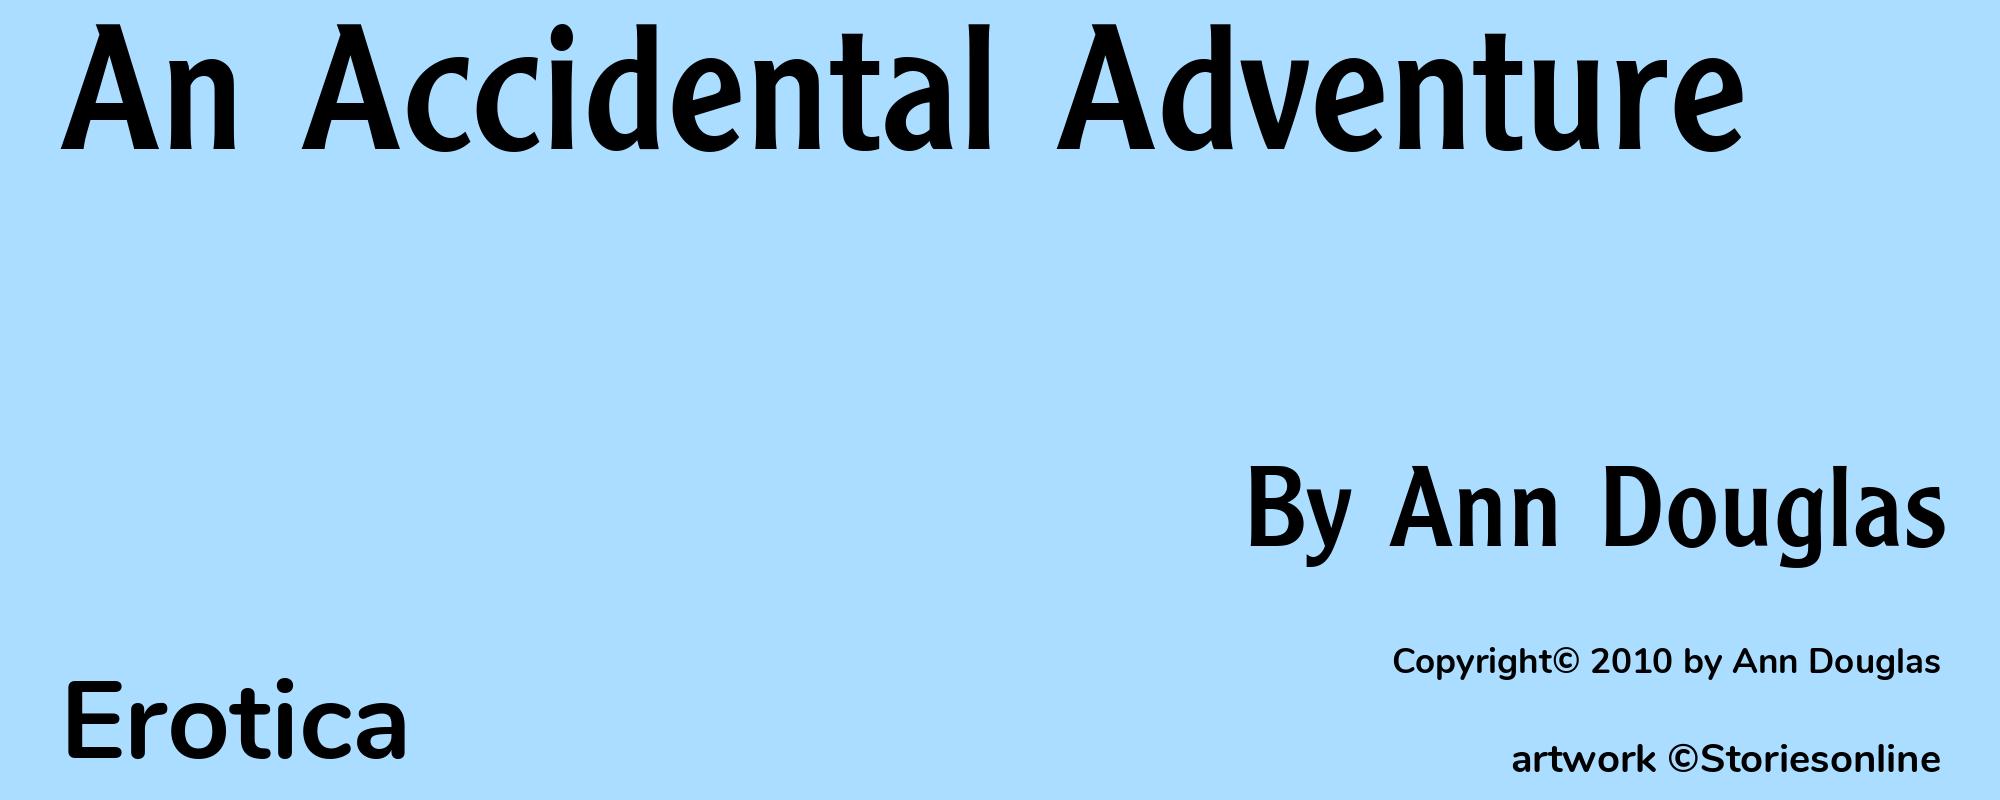 An Accidental Adventure - Cover